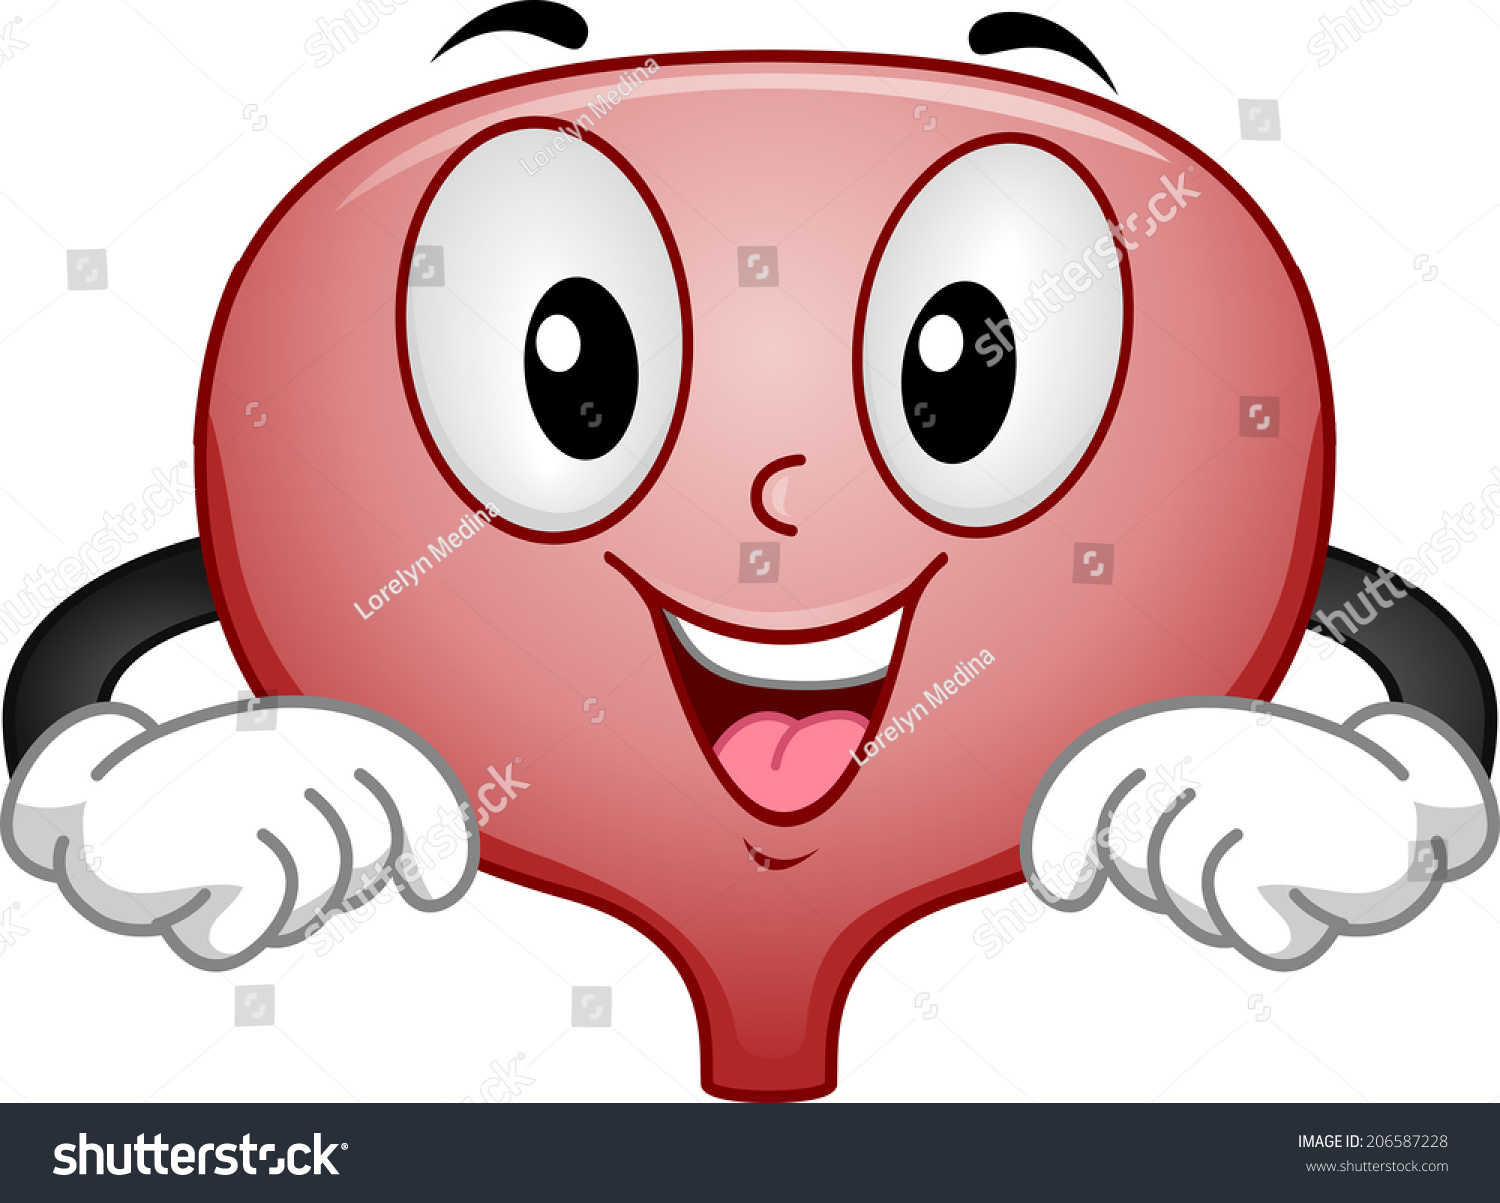 Mascot Illustration Featuring Happy Bladder Stock Vector (Royalty Free ...